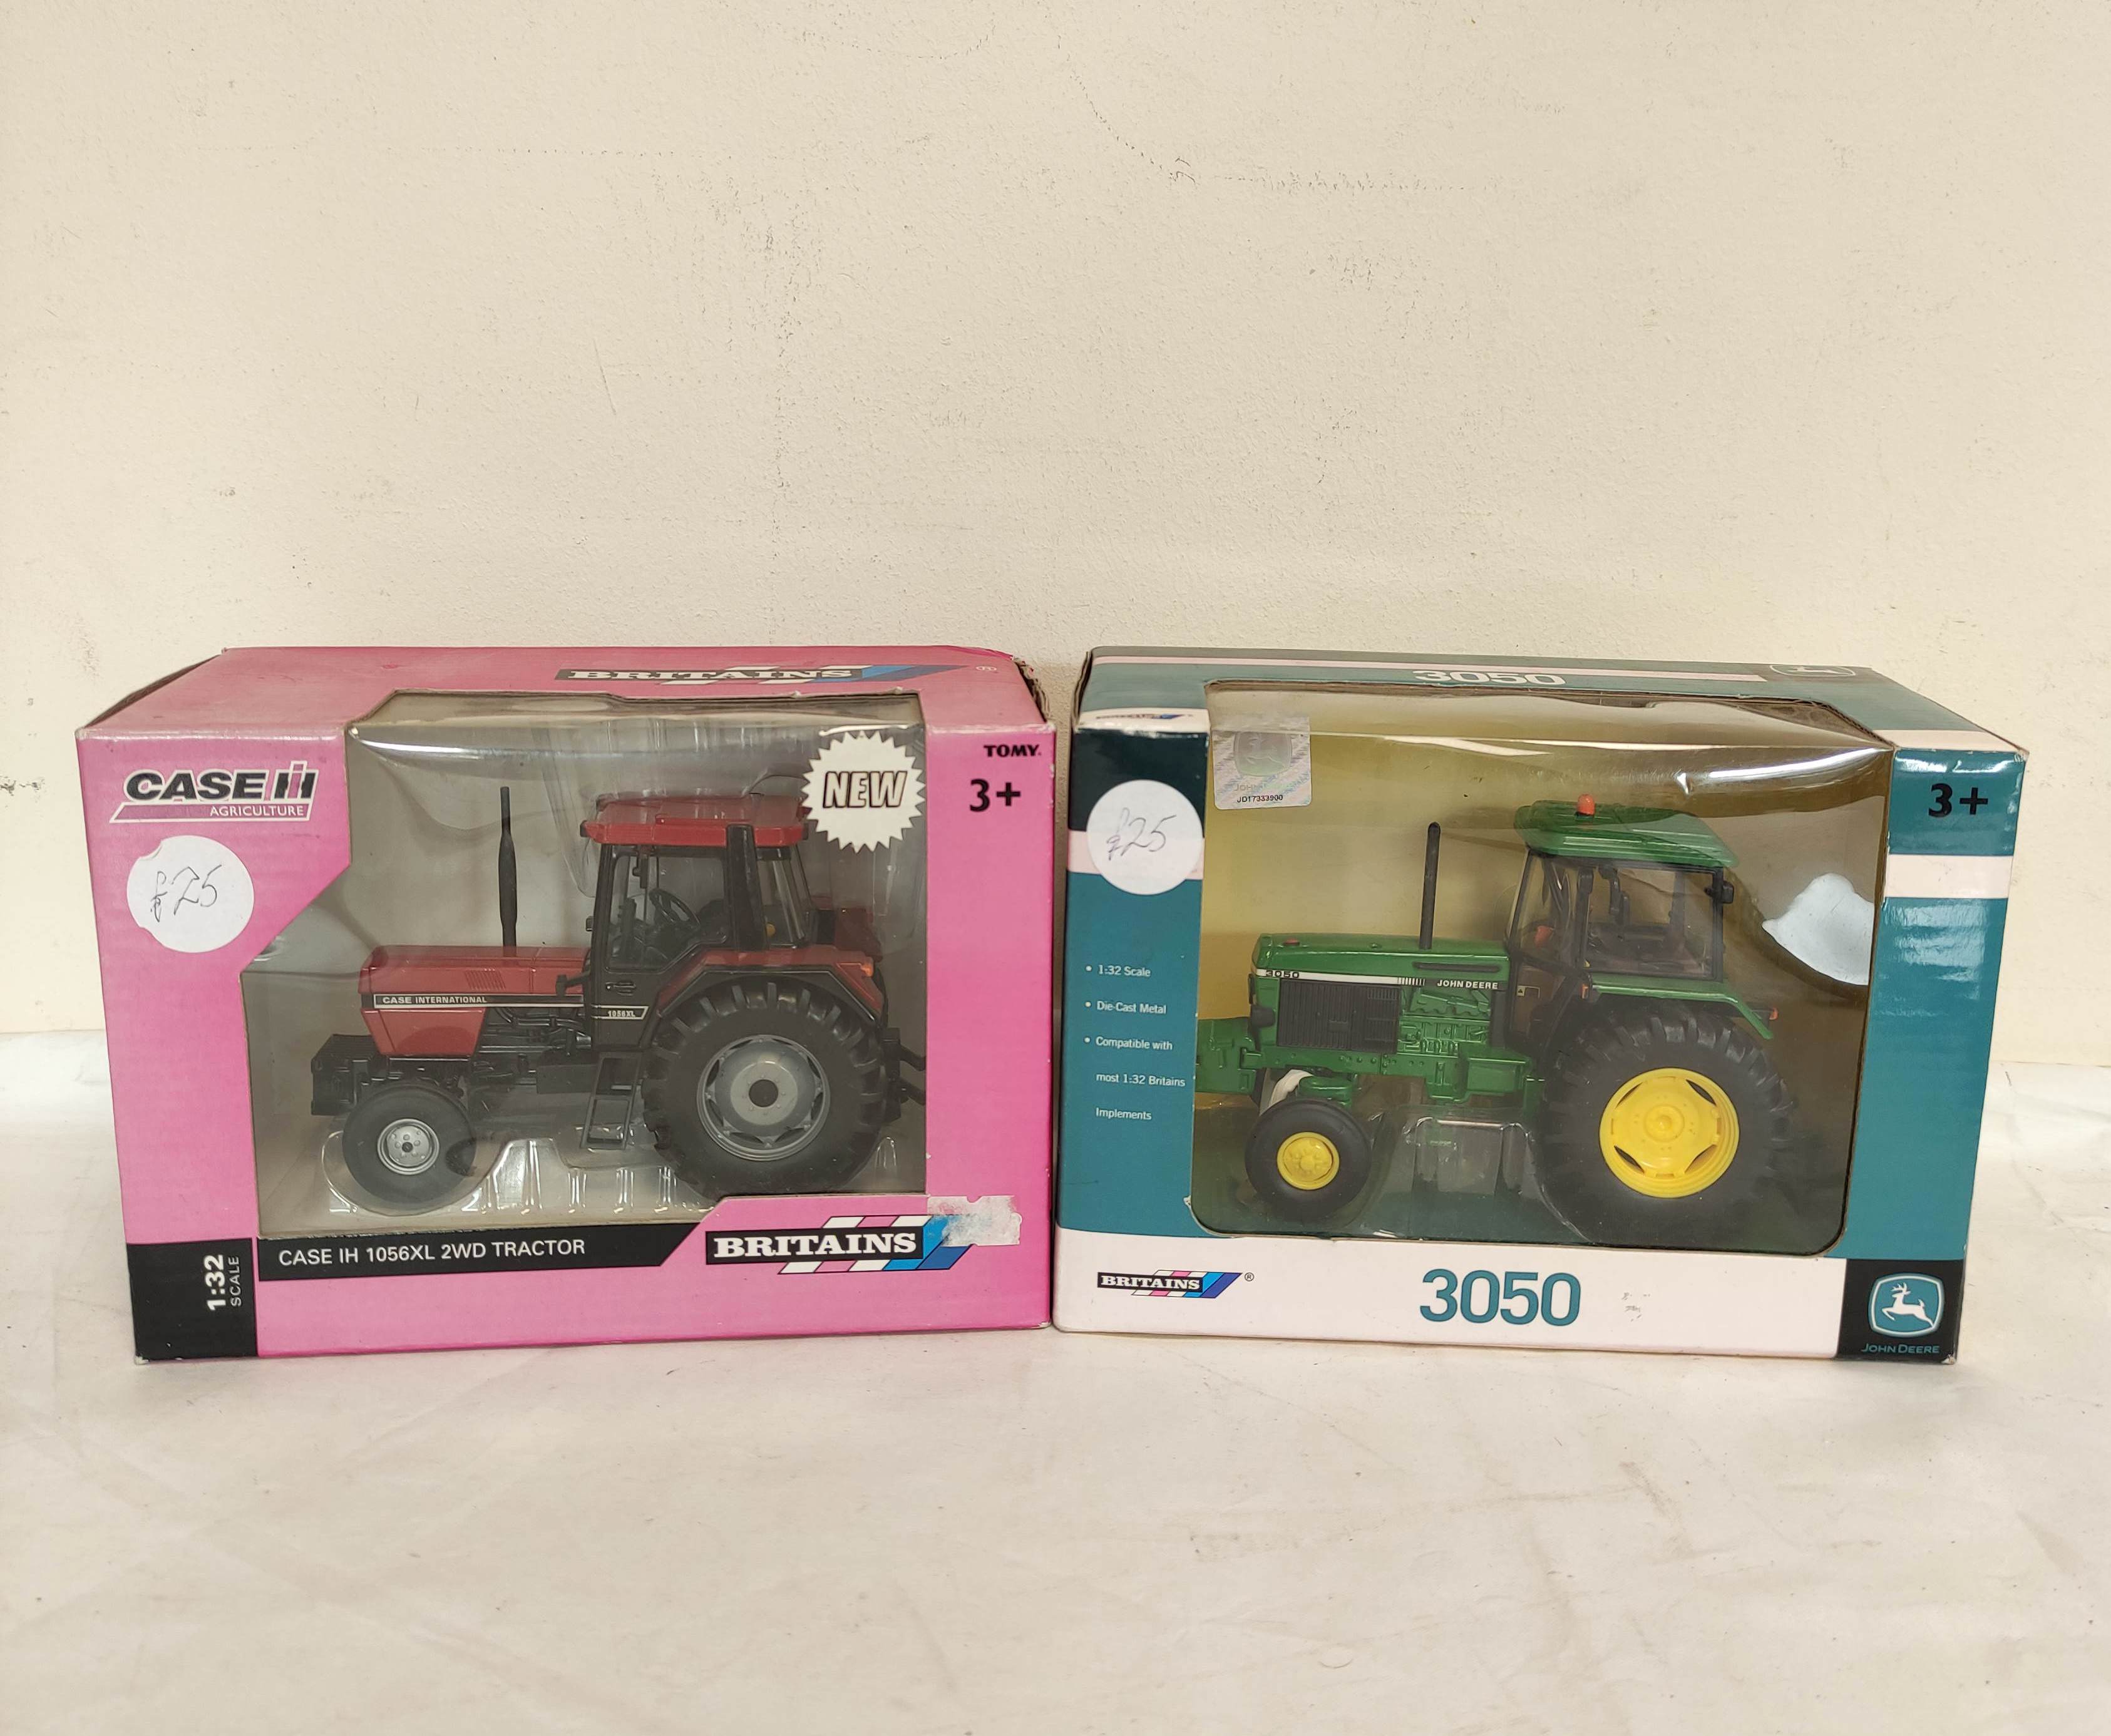 Two boxed 1:32 scale Britains model tractors to include John Deere 3050 42902 & a Case IH 1056XL 2WD